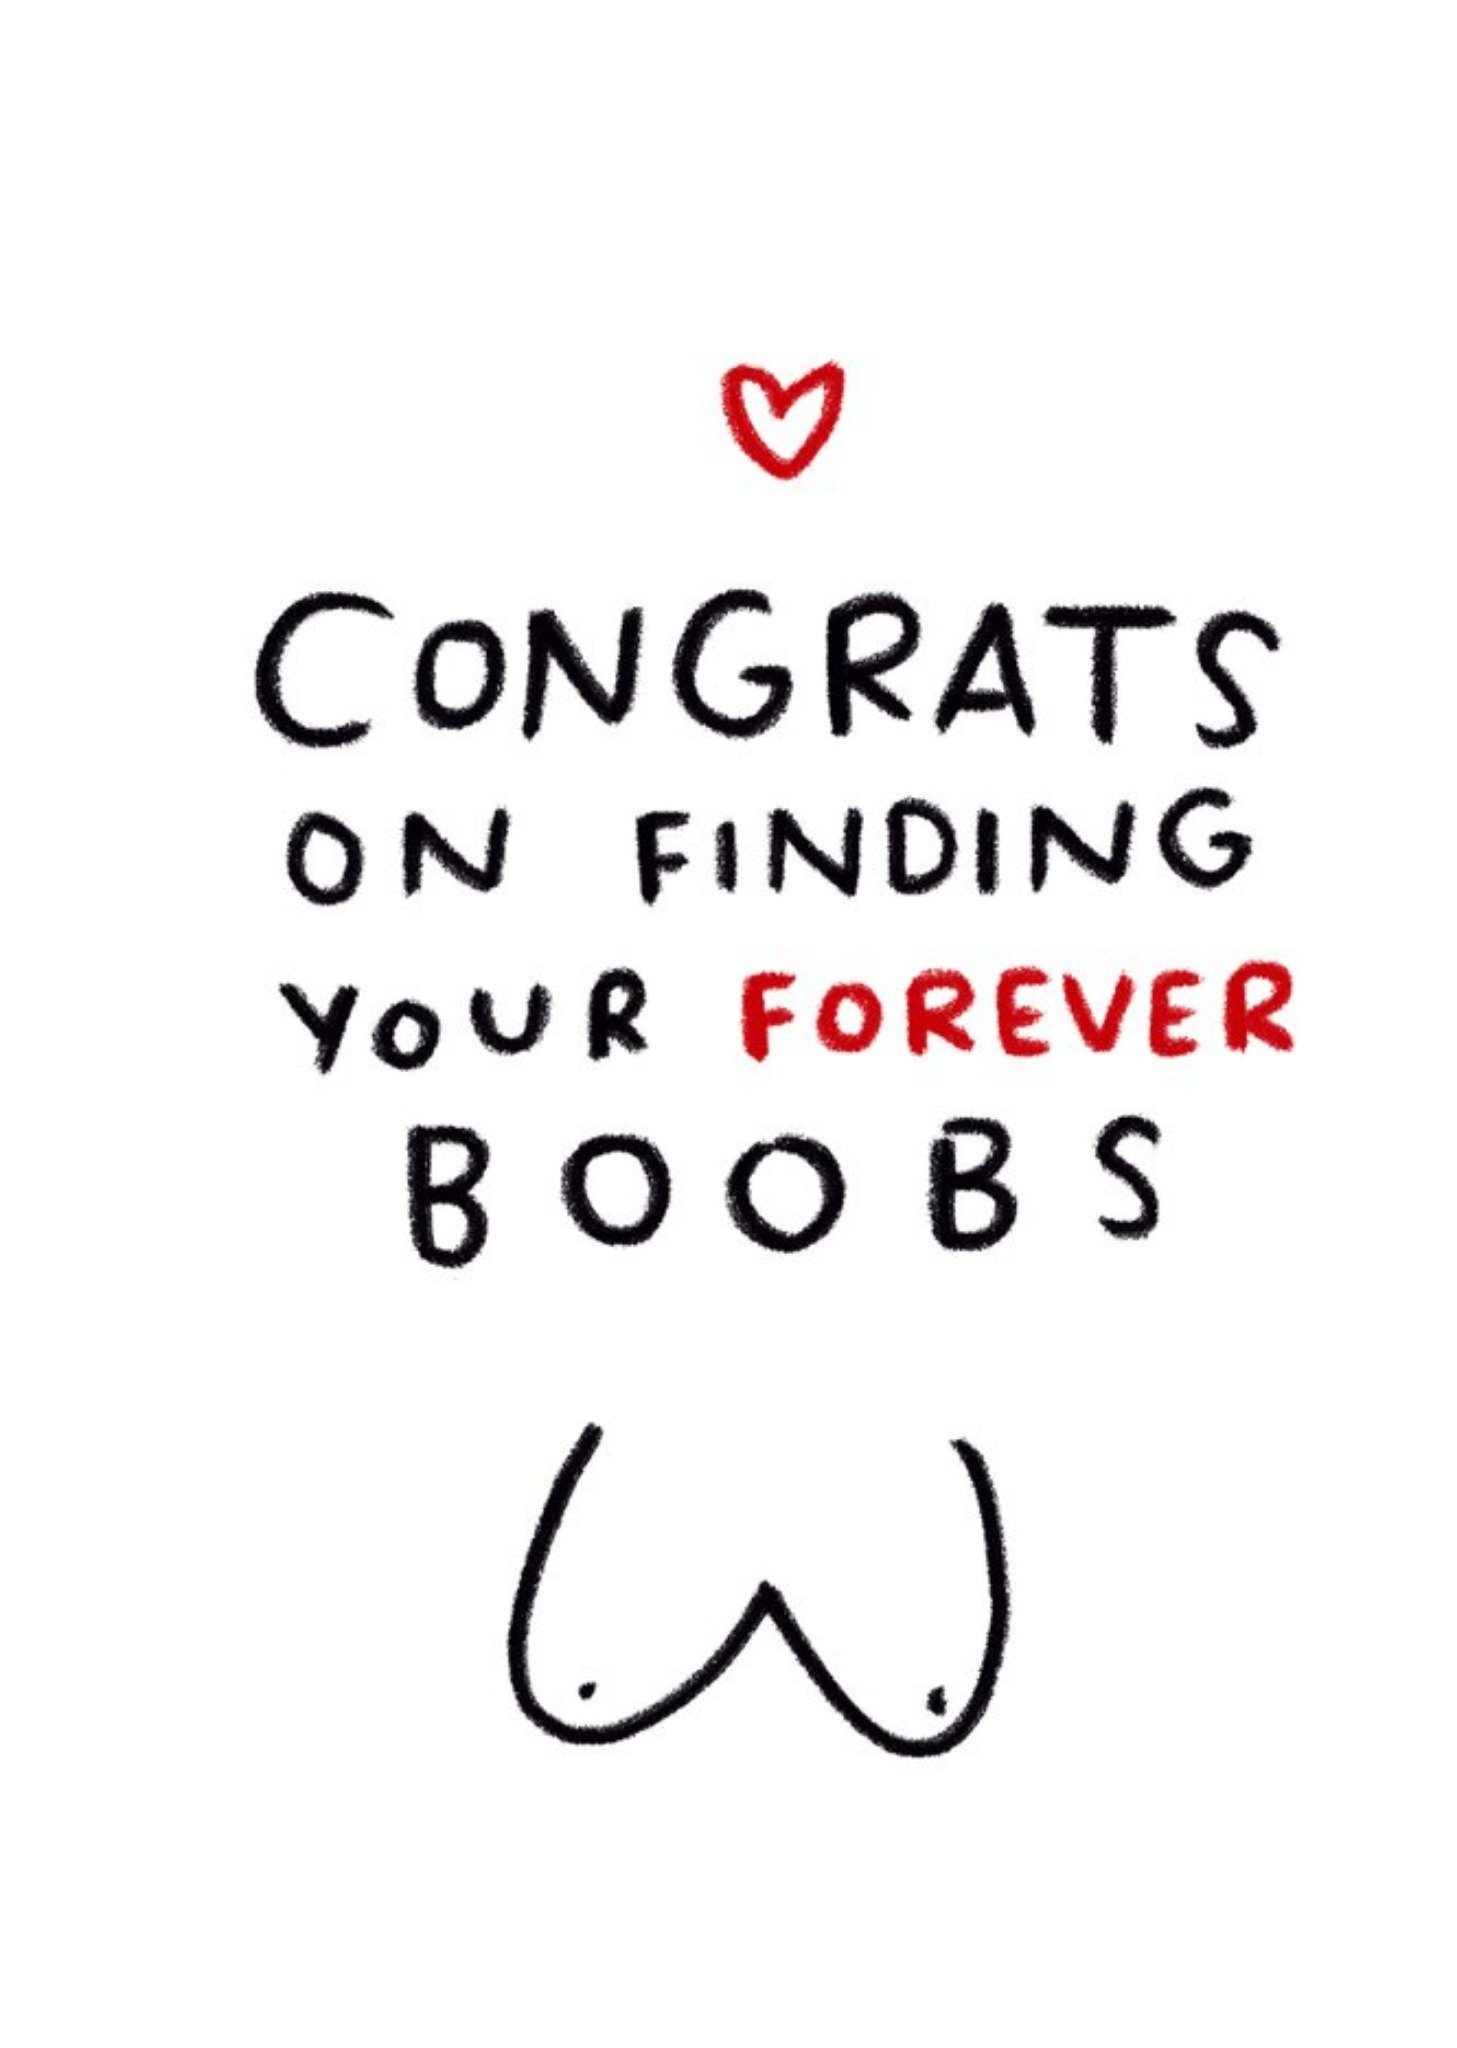 Moonpig Congrats On Finding Your Forever Boobies Rude Same Sex Gay Wedding Card, Large